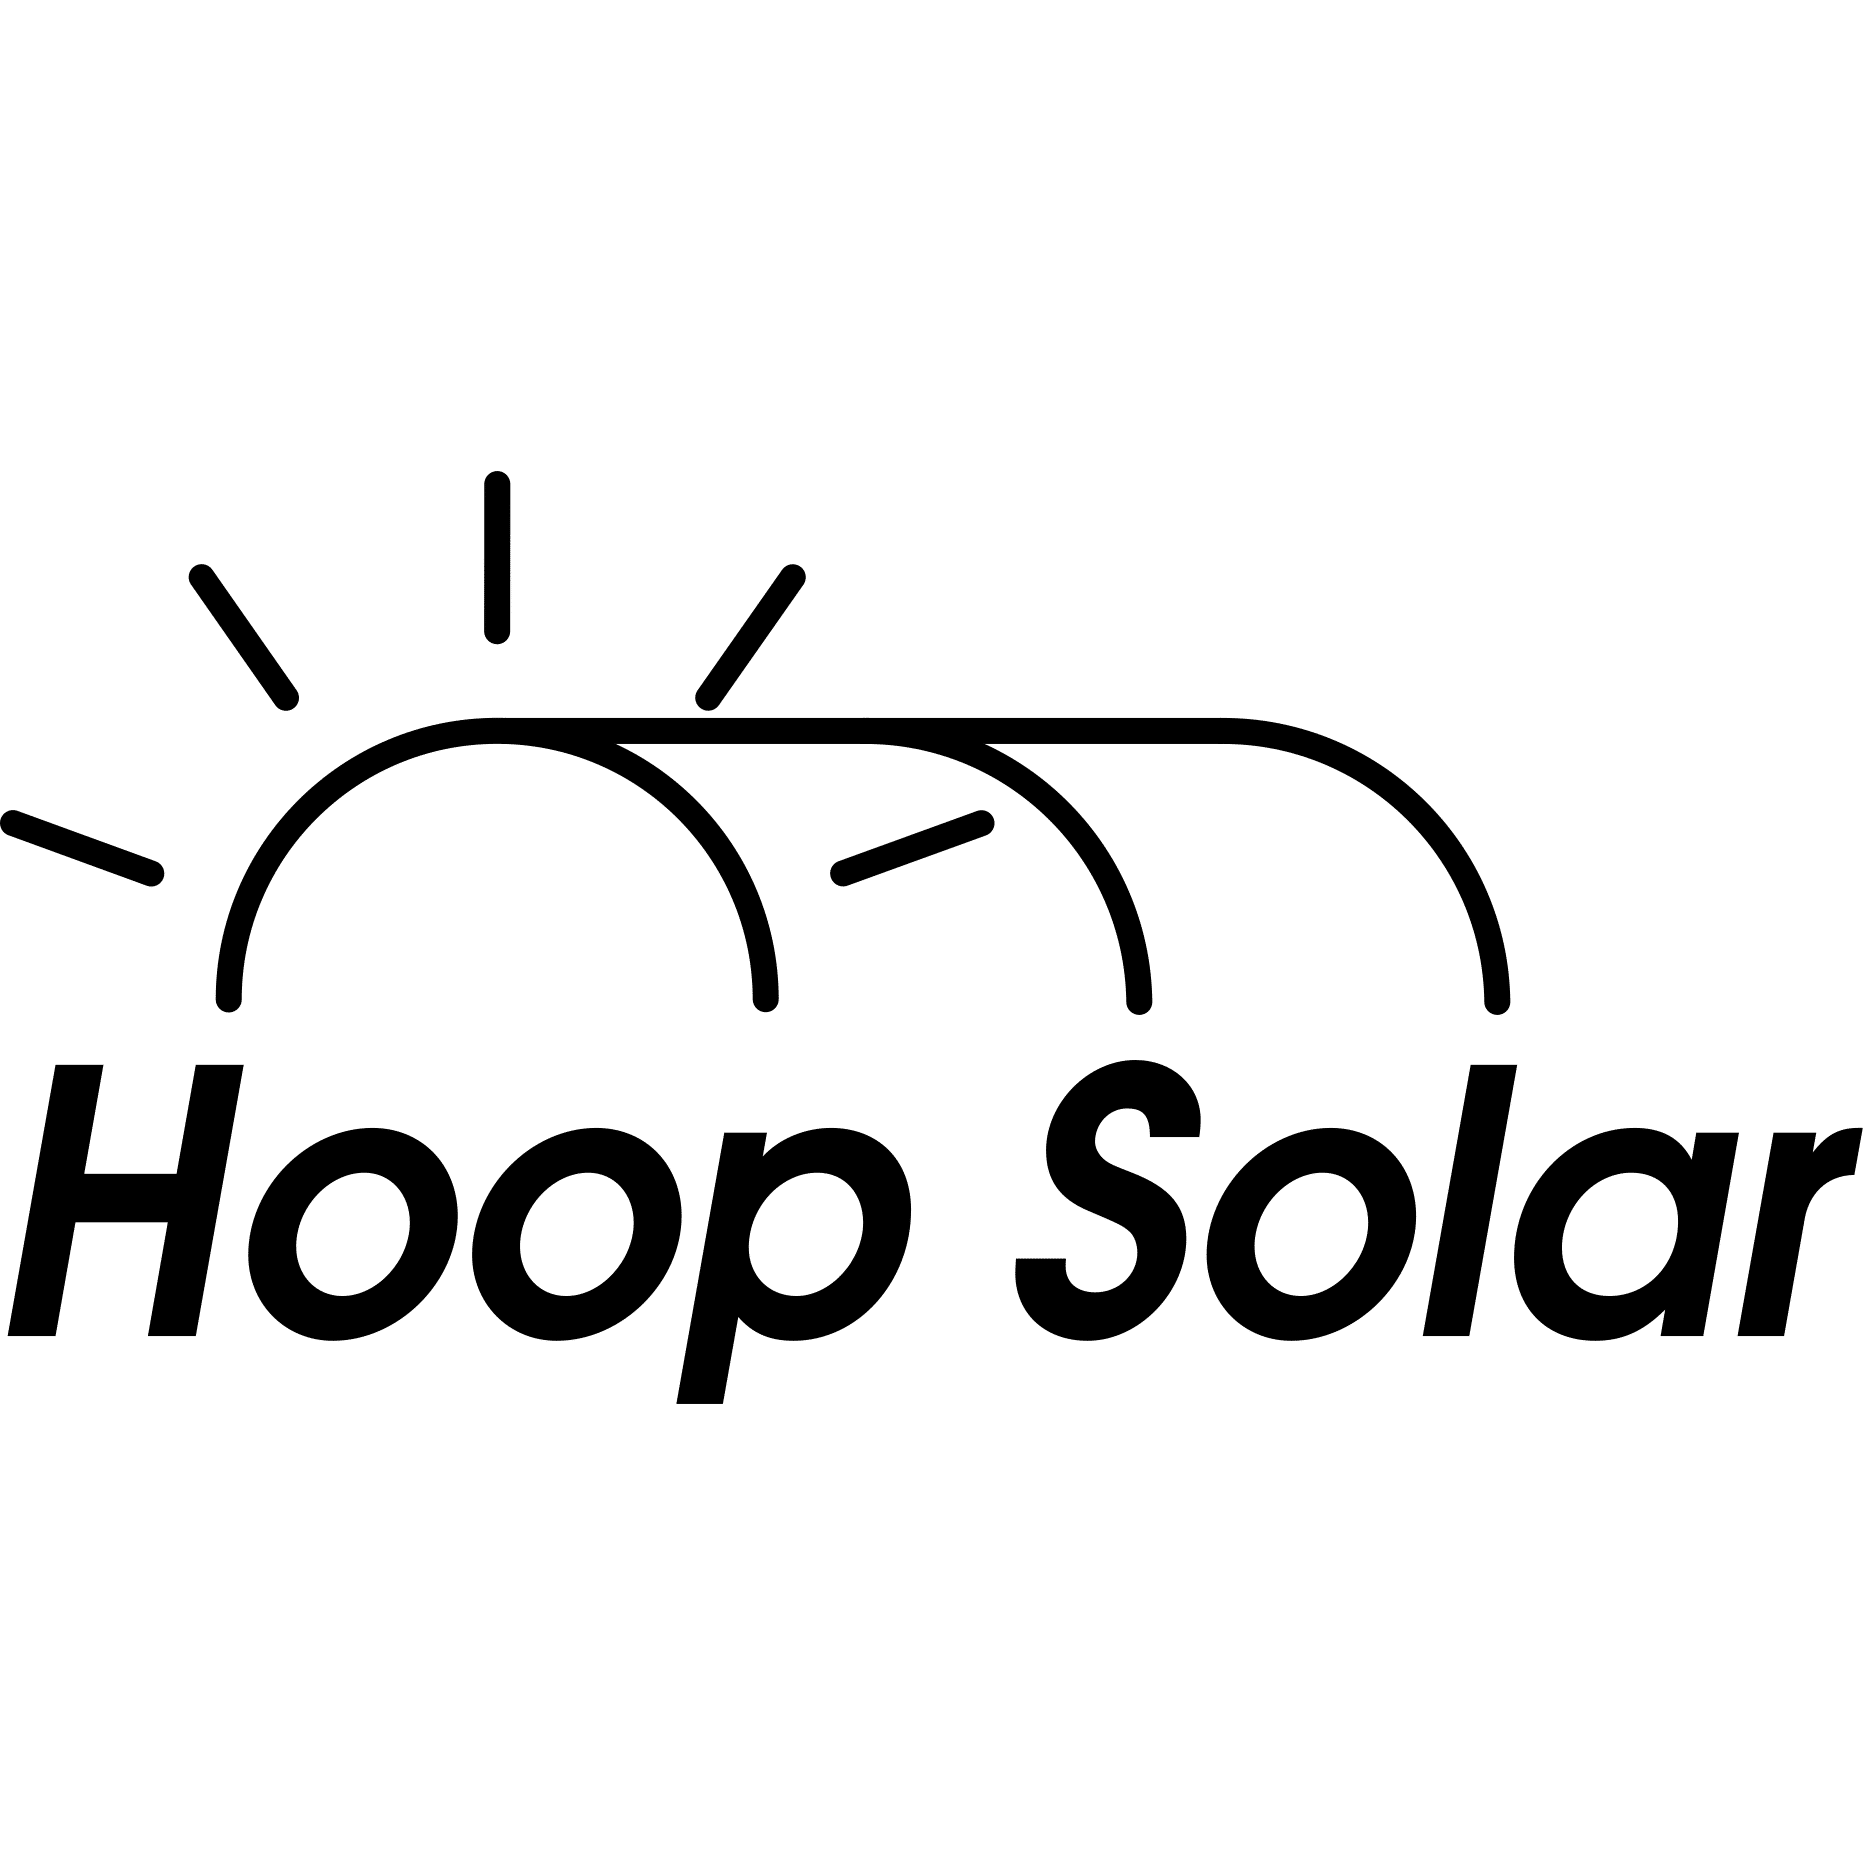 This is hoop solar, on of the startups out of our Hardtech Innovation accelerator program.